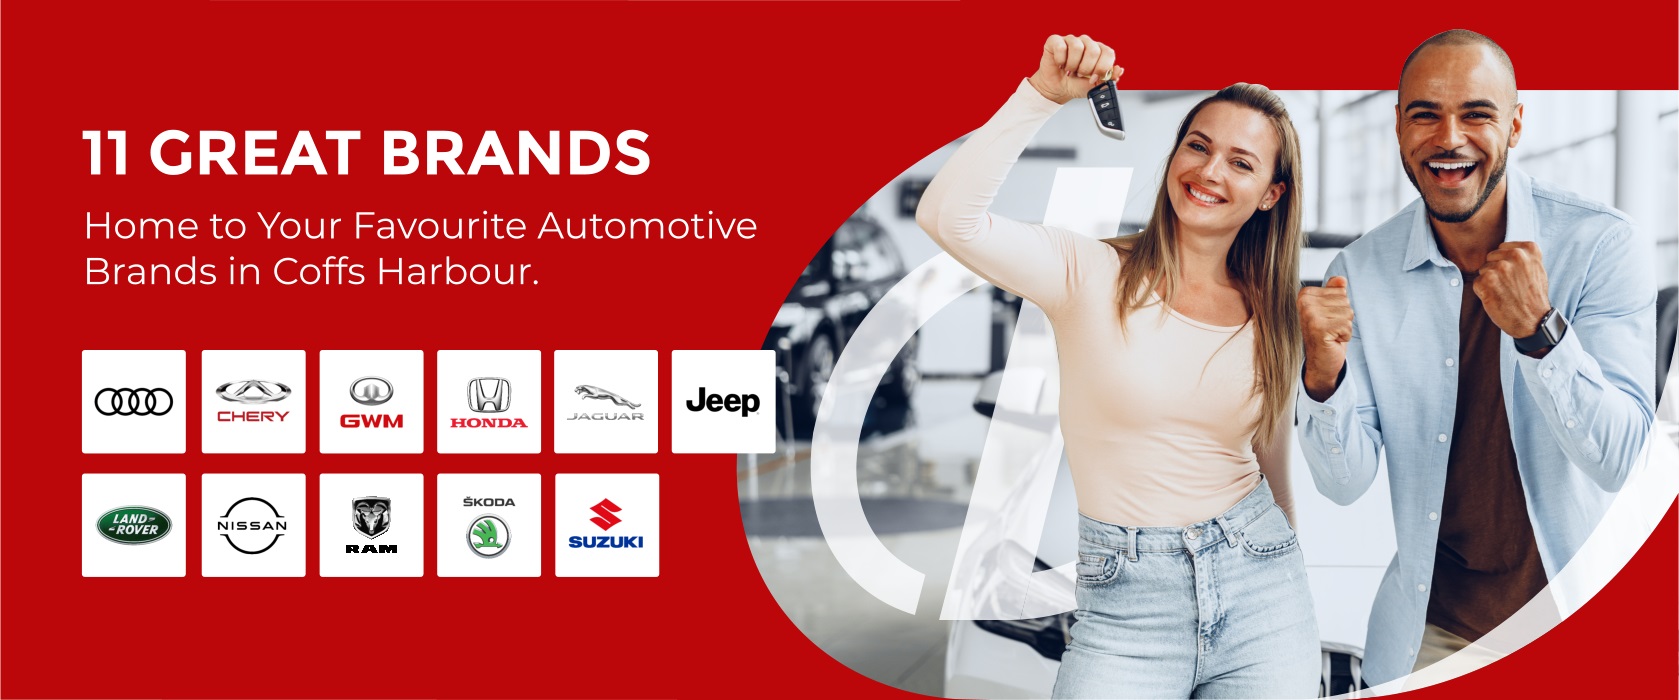 11 Great Brands - Home of Your Favourite Automotive Brands in Coffs Harbour.